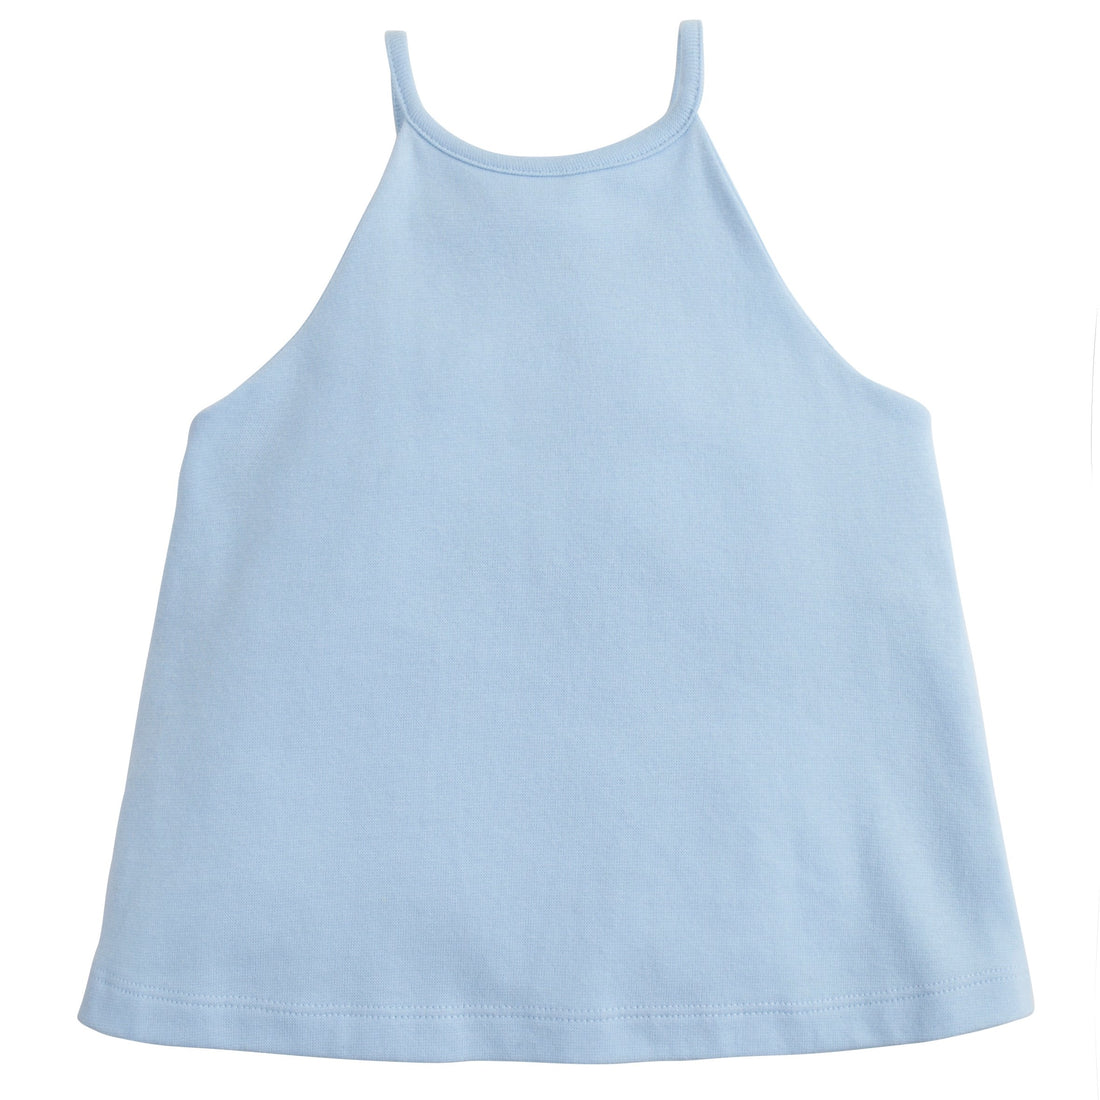 girls light blue tank top with halter neck by BISBY